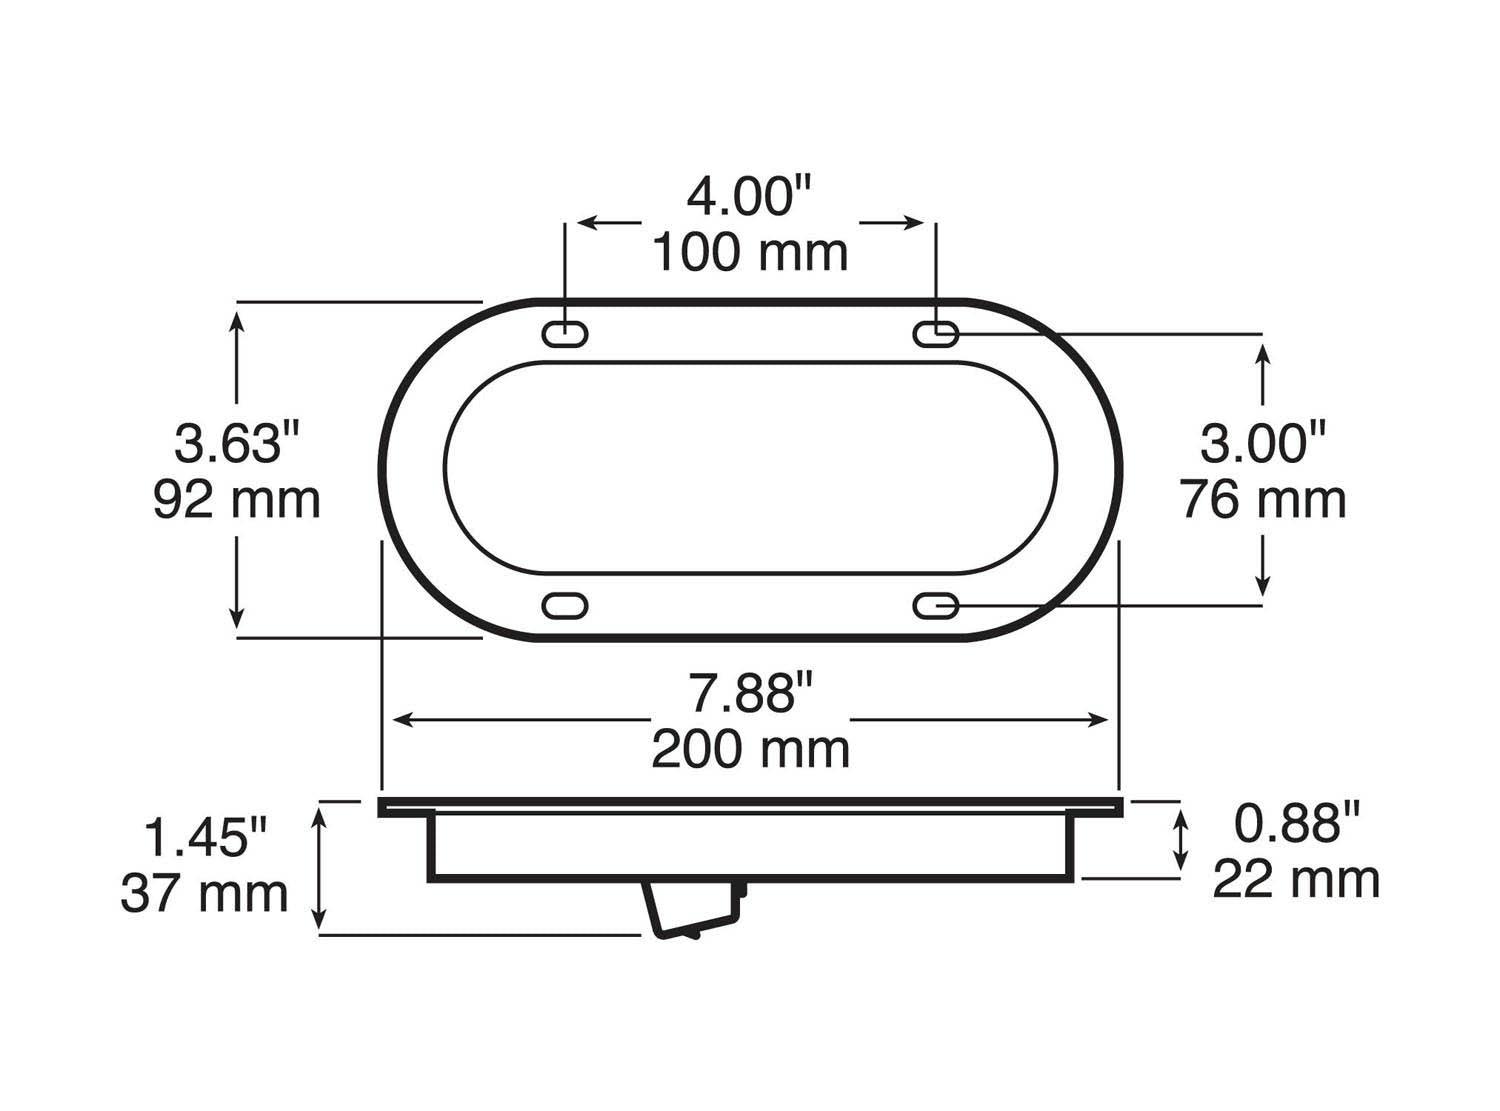 LED Stop/Turn/Tail, & Back-Up Light, Oval, Flange-Mount 6.50"X2.25", red + white, bulk pack (Pack of 50) - 823_line_dual_2view-BX5_2e9de11a-5744-4380-be1a-a79d442ca39a